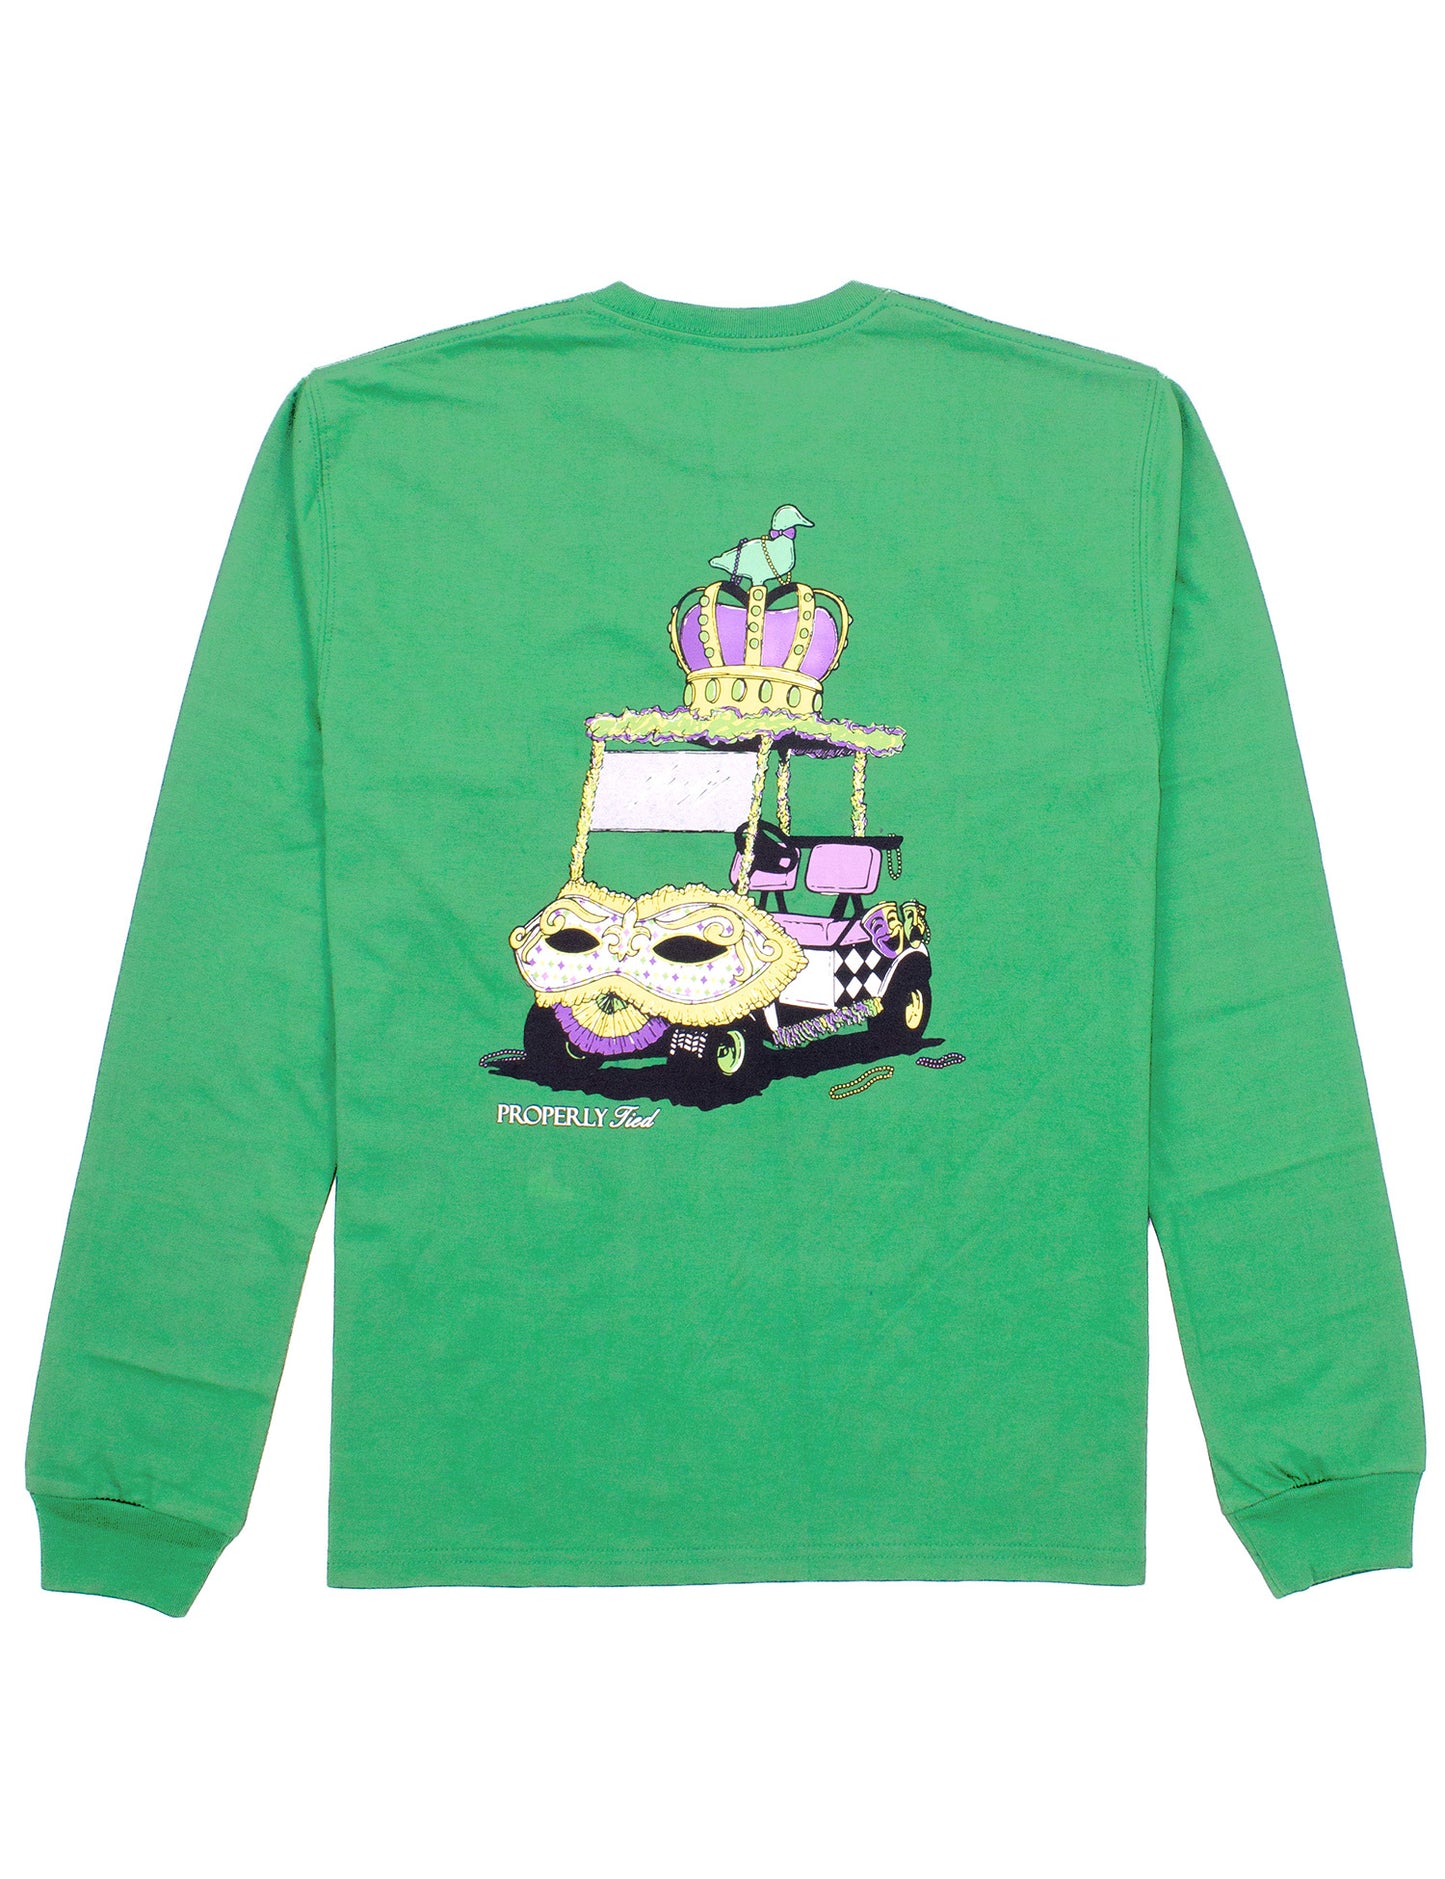 A green long-sleeved Properly Tied Mardi Cart Long-Sleeve T-shirt for Kids with a picture of a car and mask.